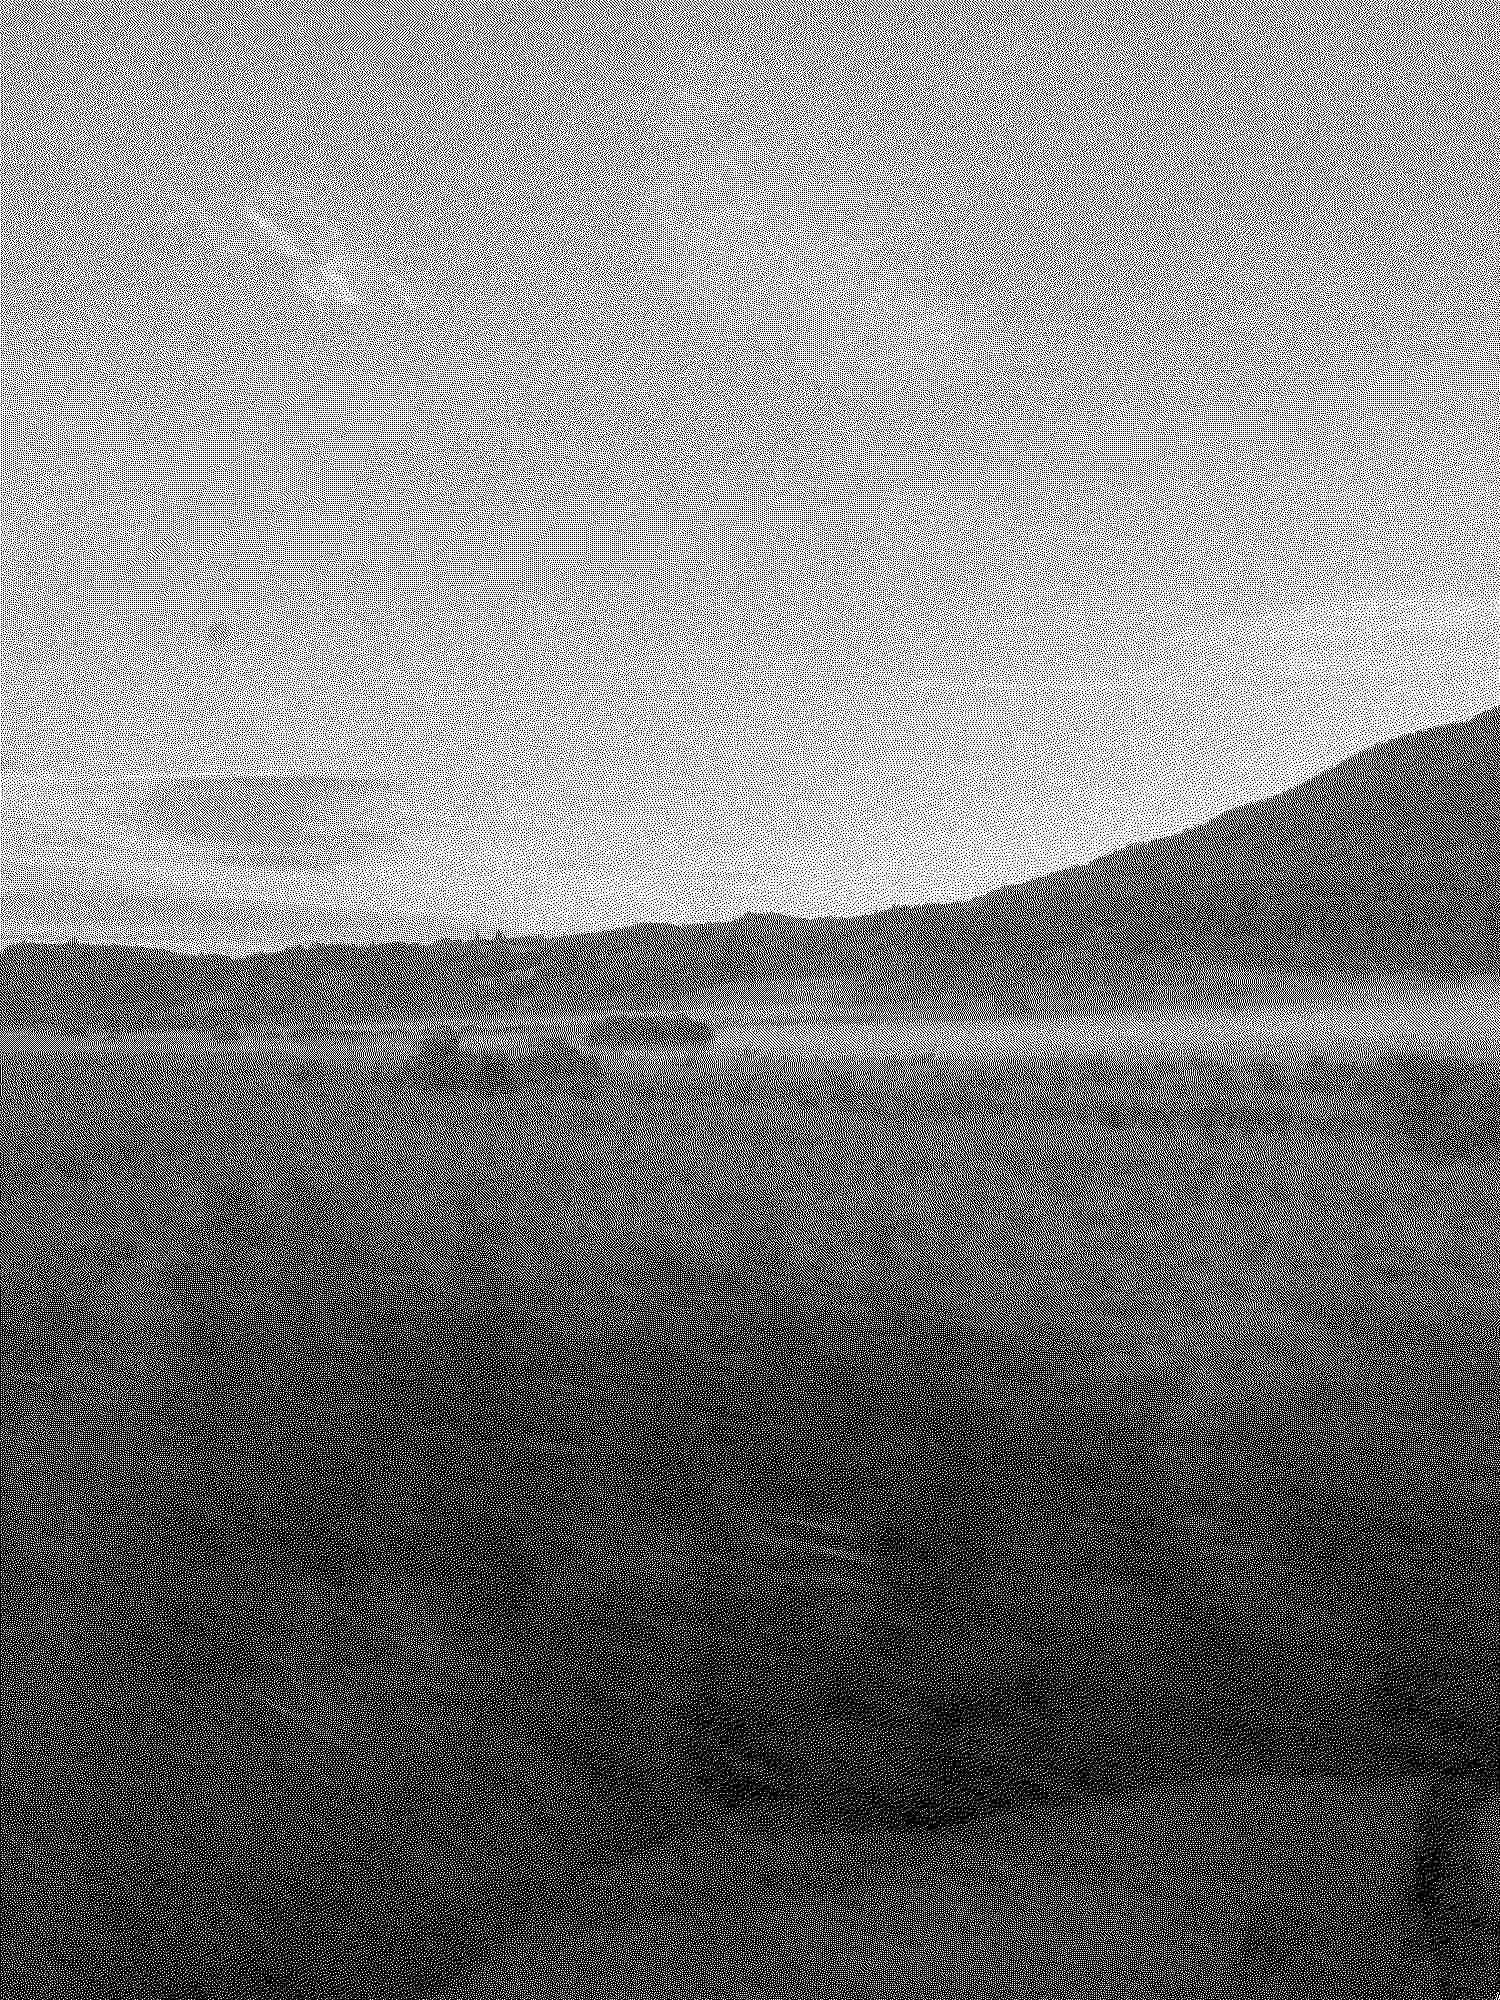 a view of mist and mountains out the window of a sleeper train in France